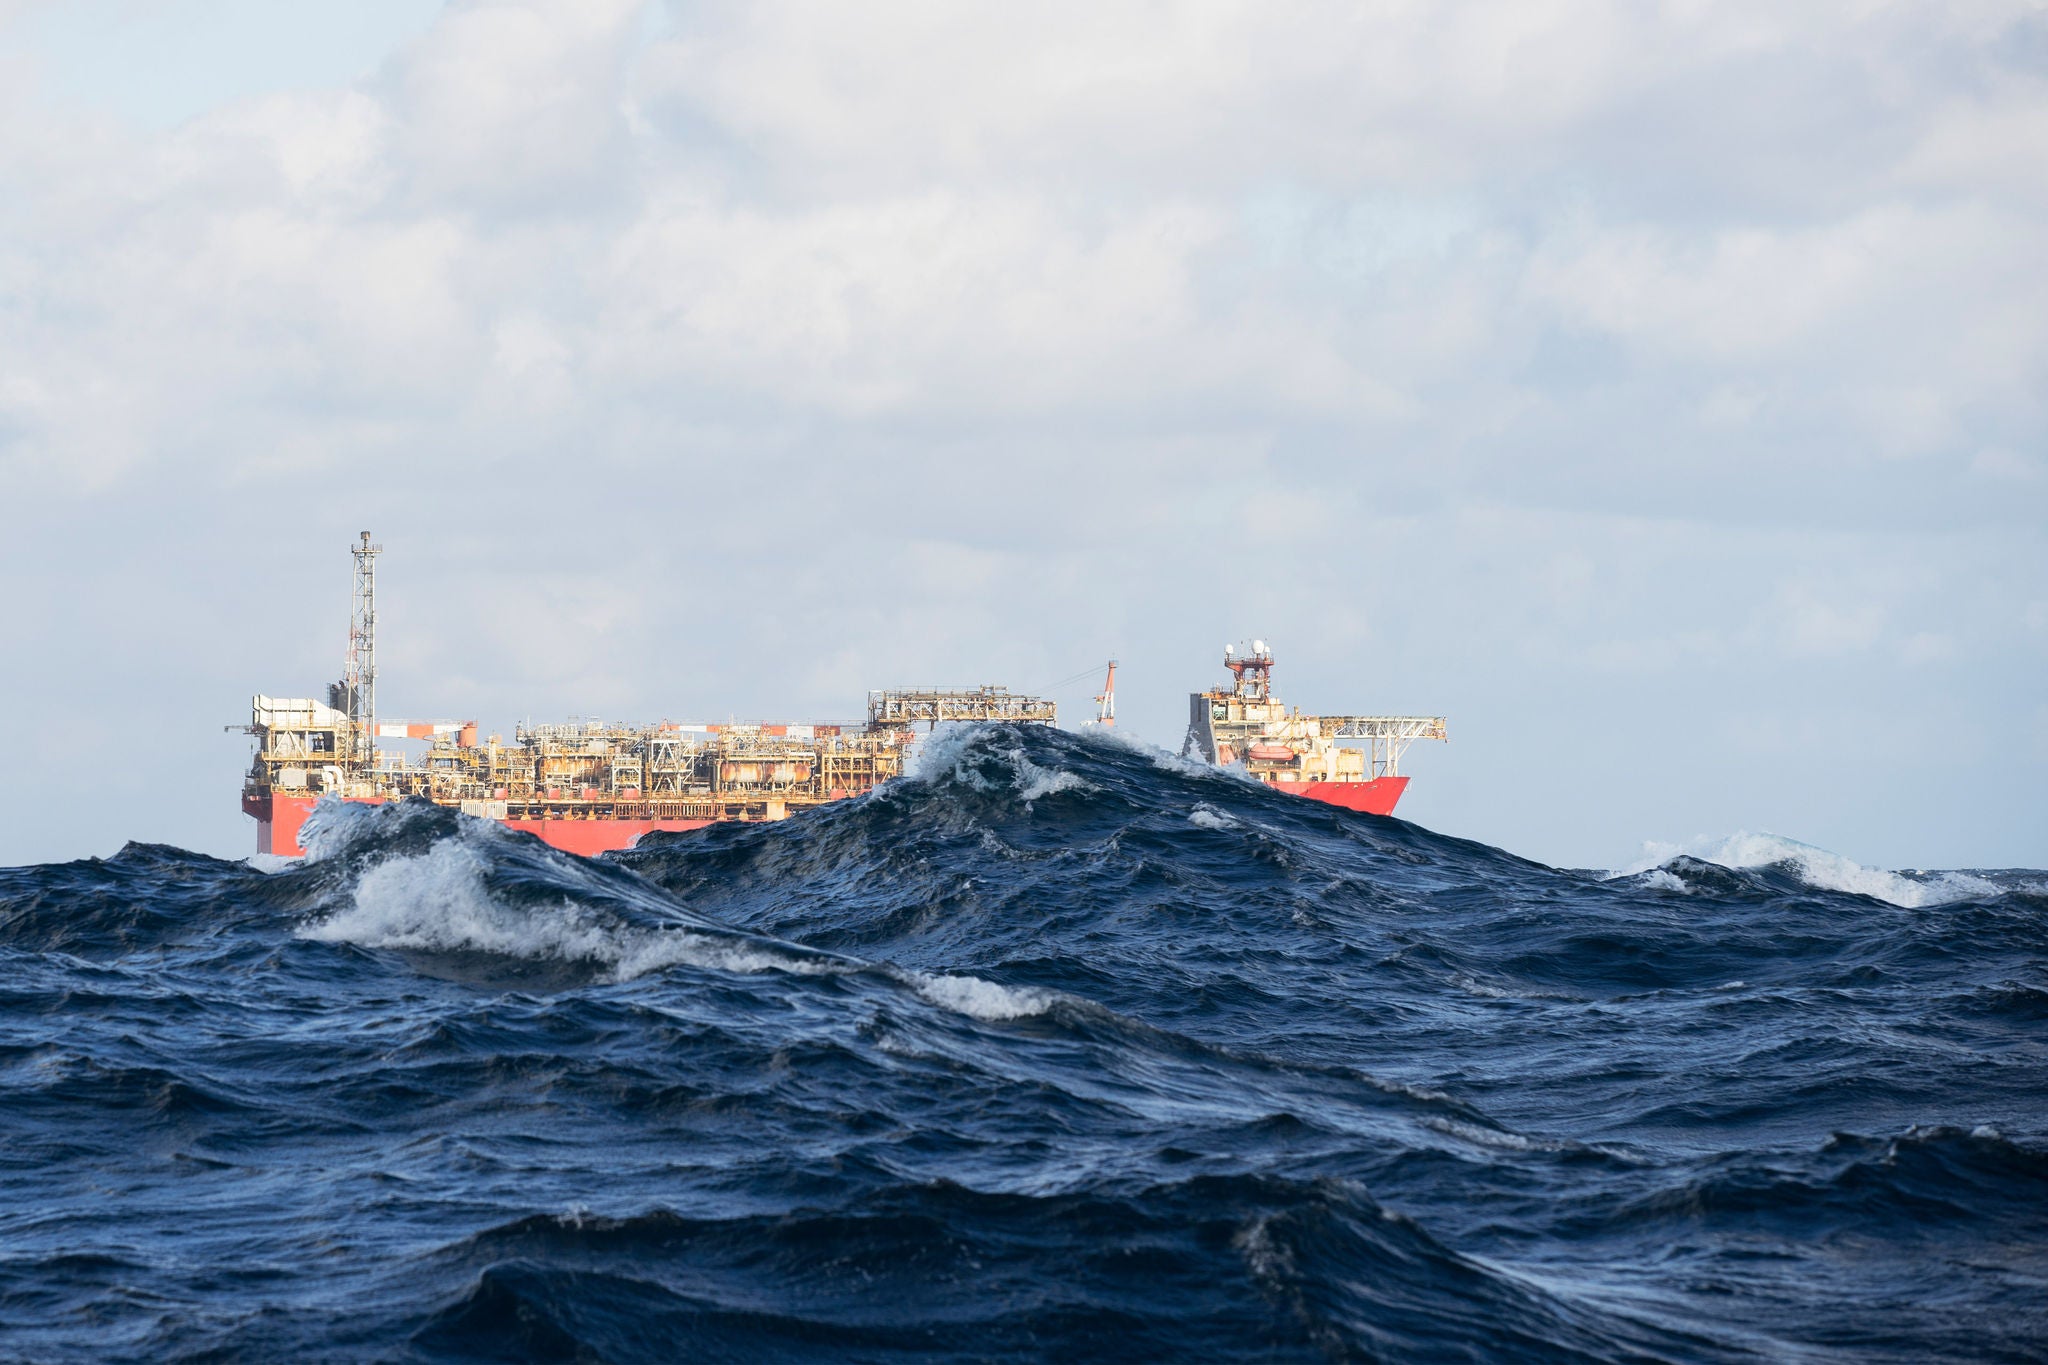 An offshore oil platform during rough sea